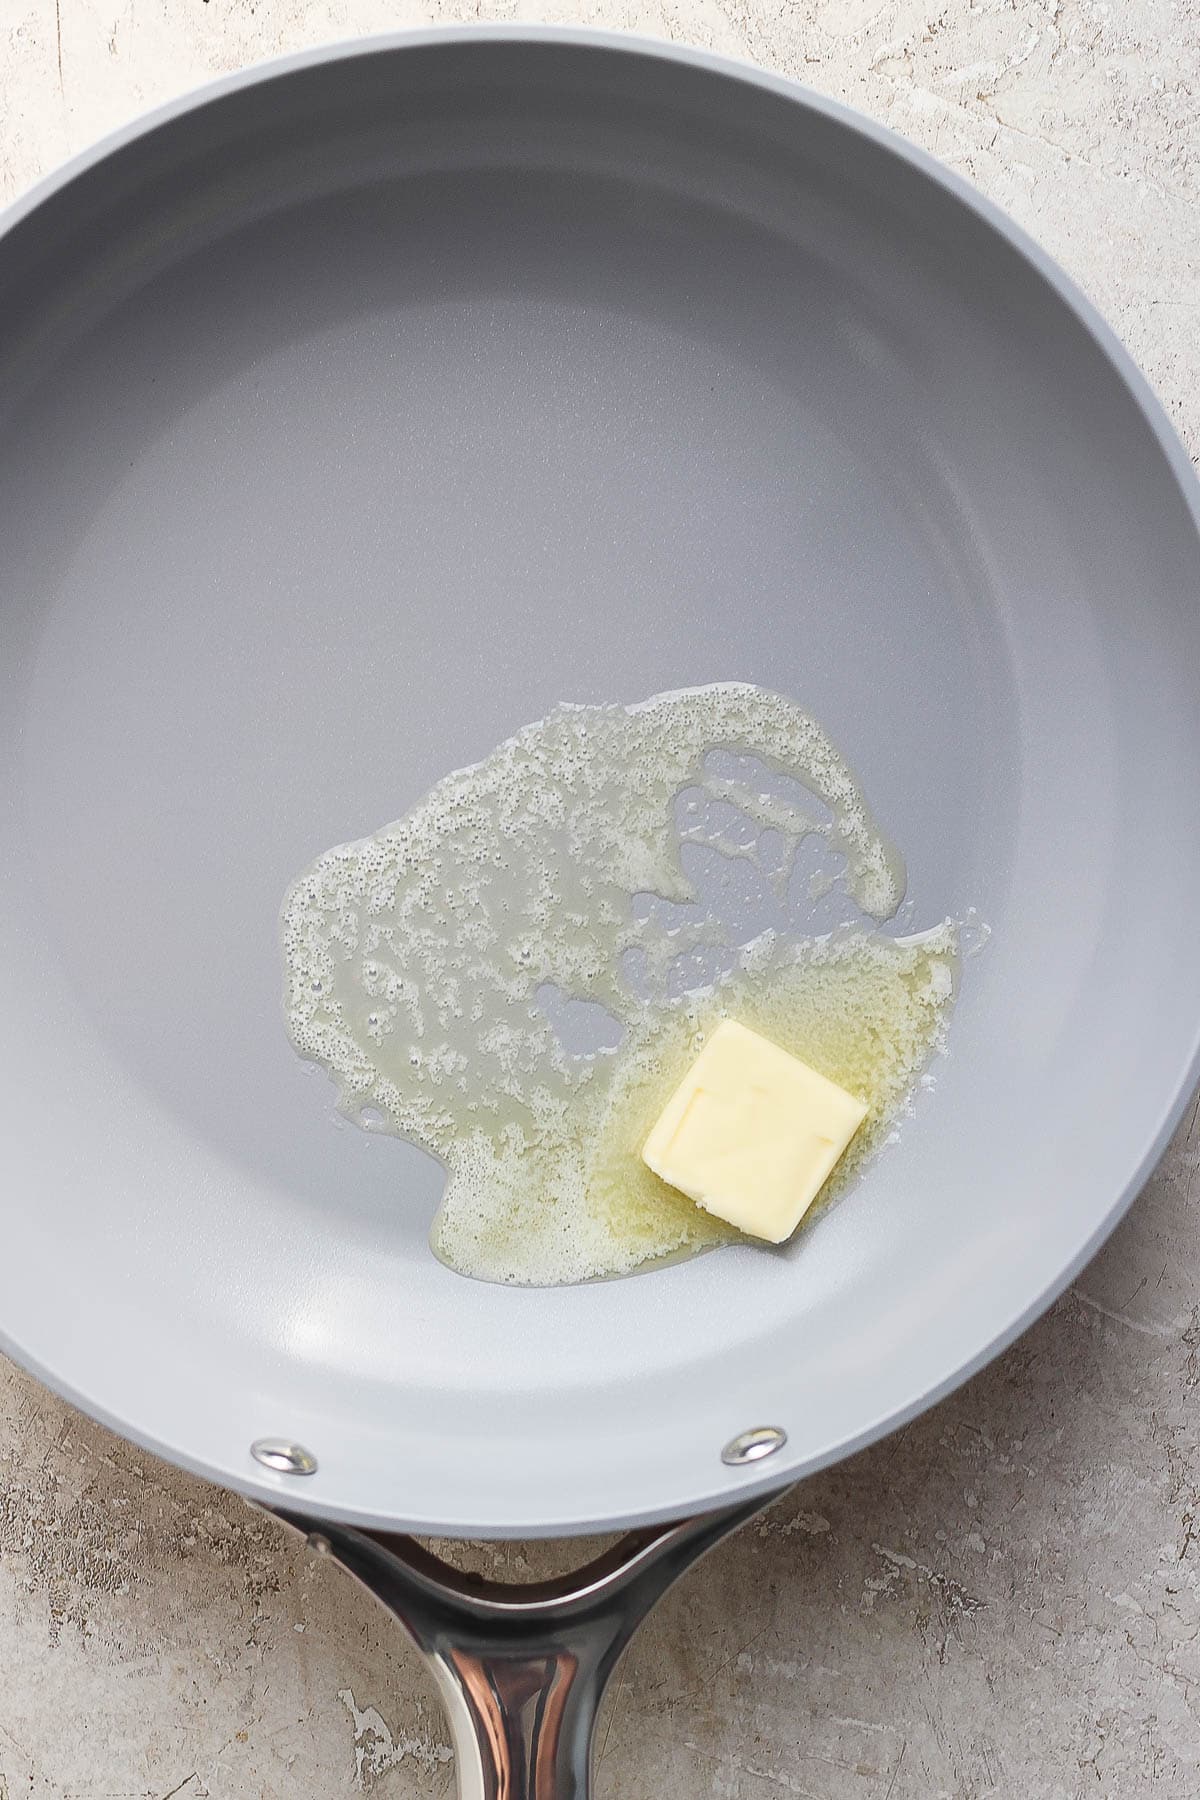 A pat of butter melting in a skillet.